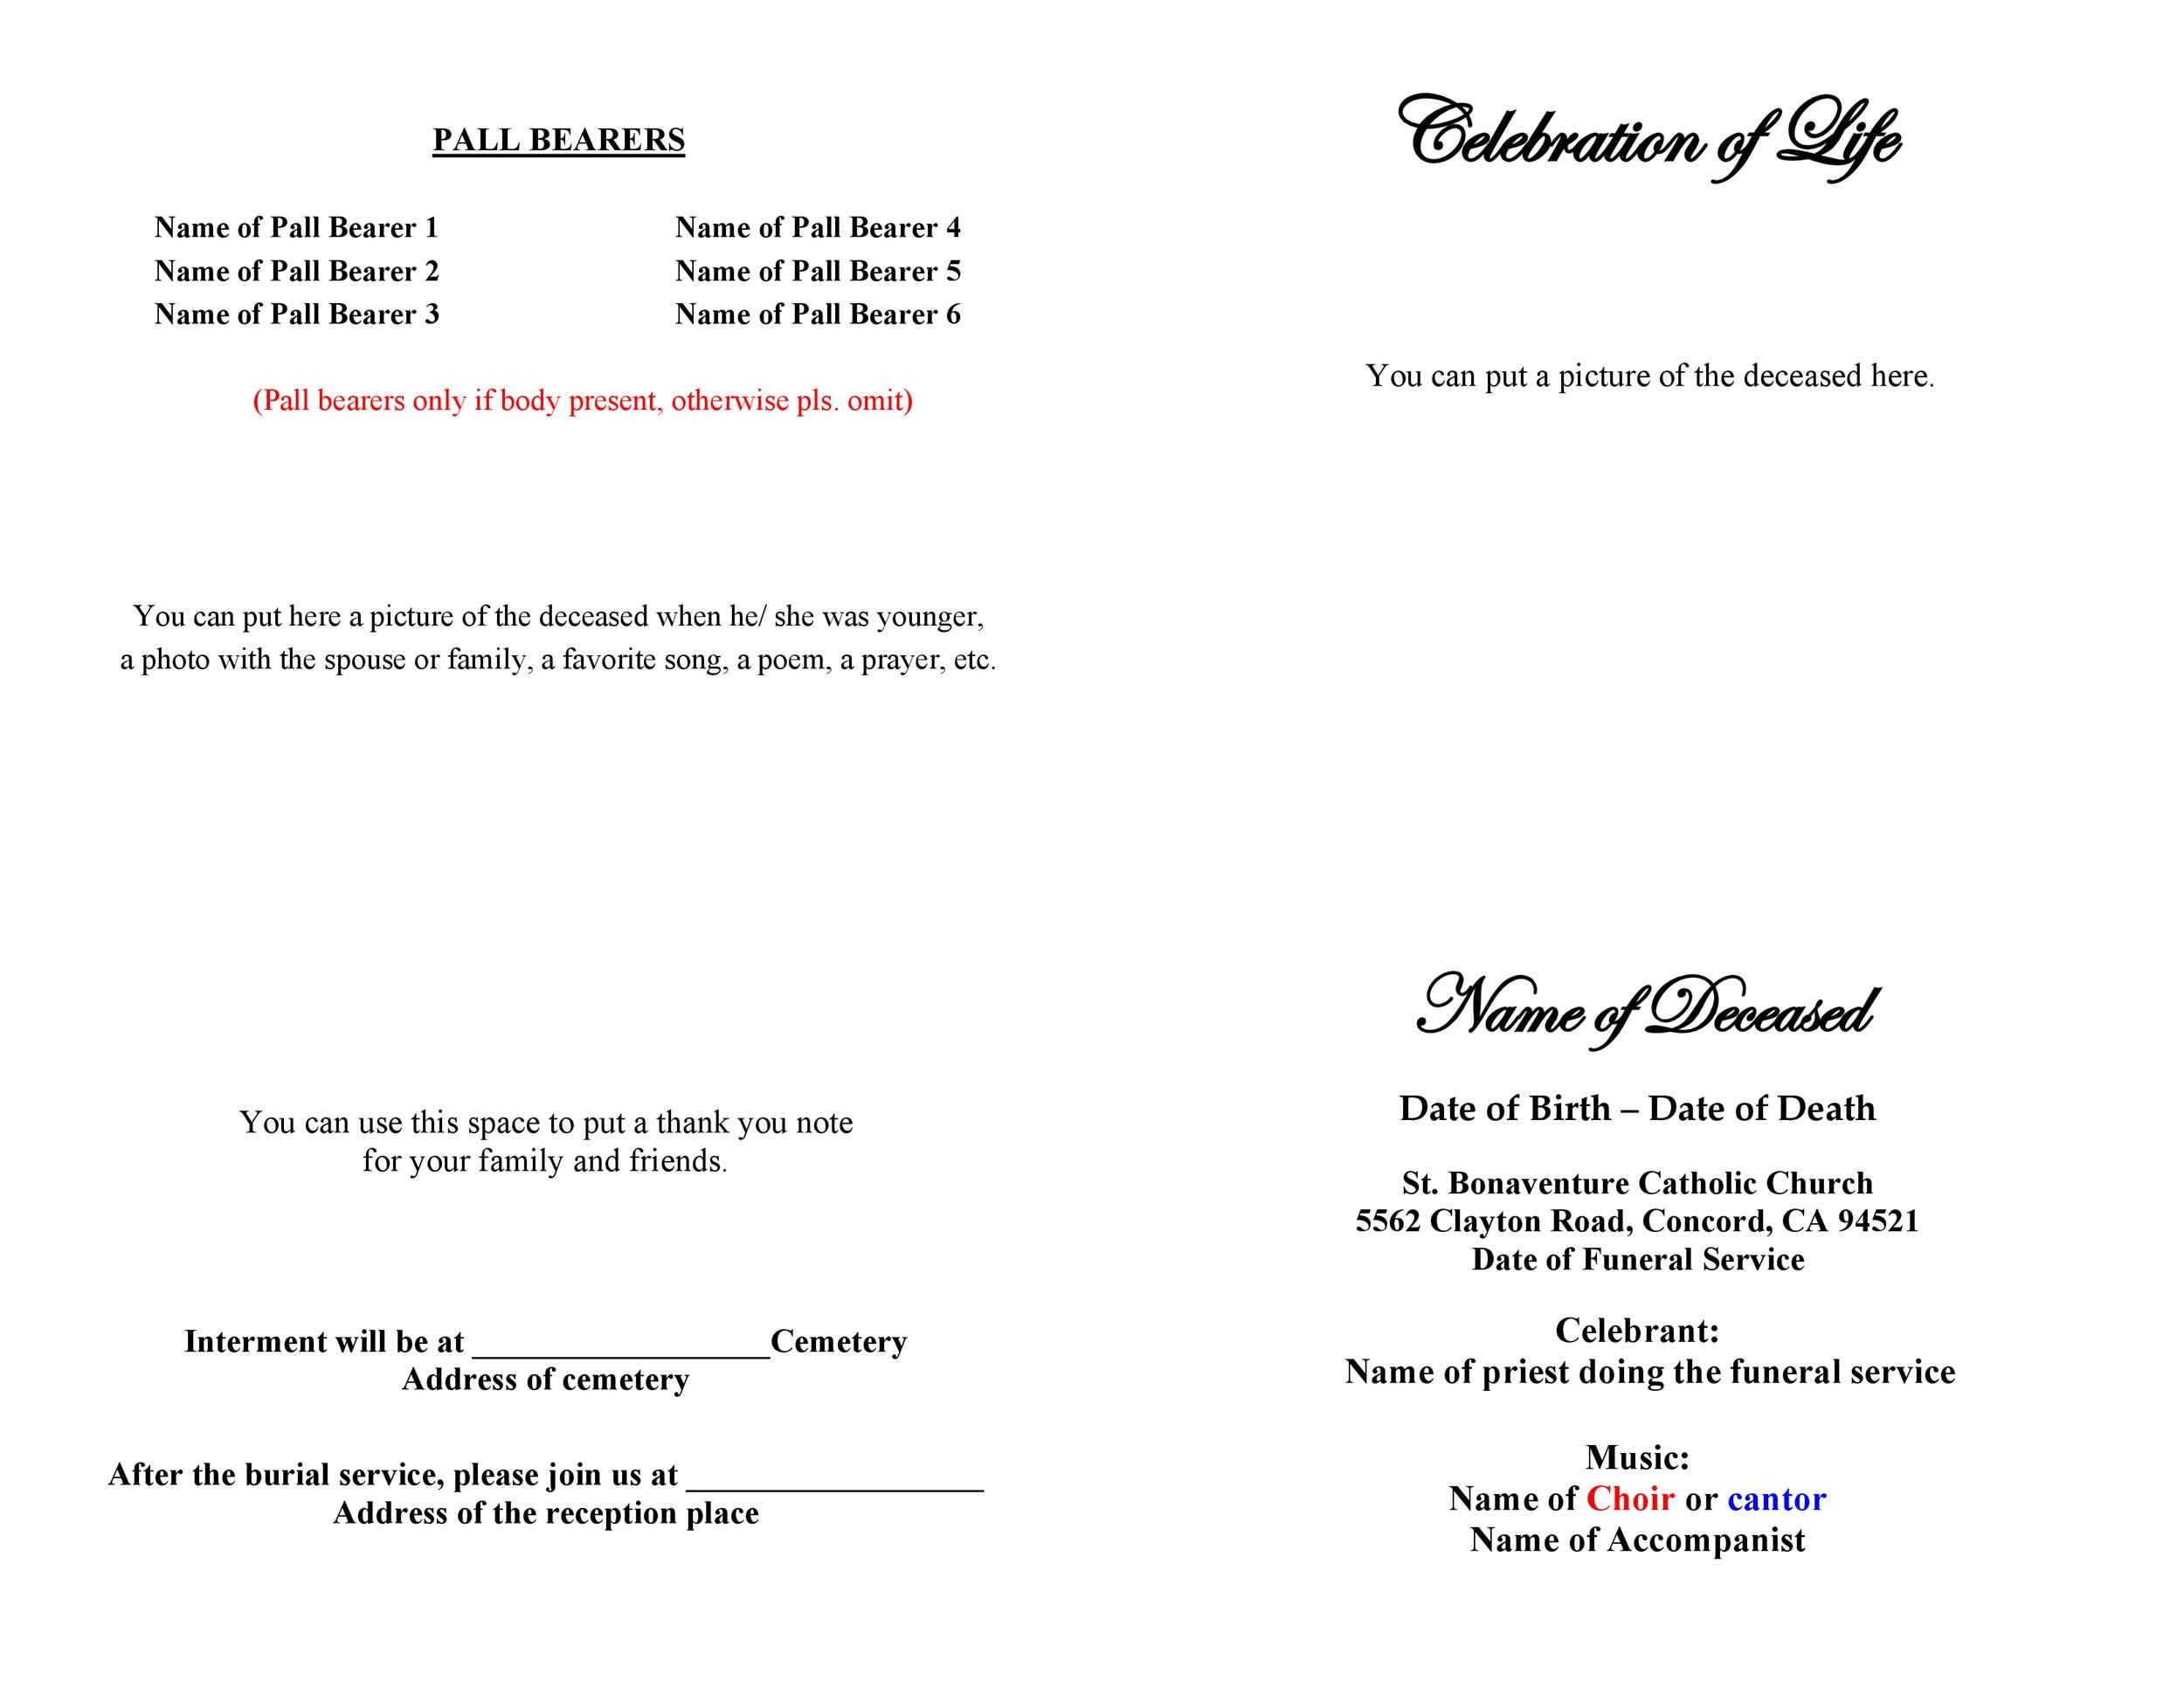 Celebration Of Life Template Free from templatelab.com